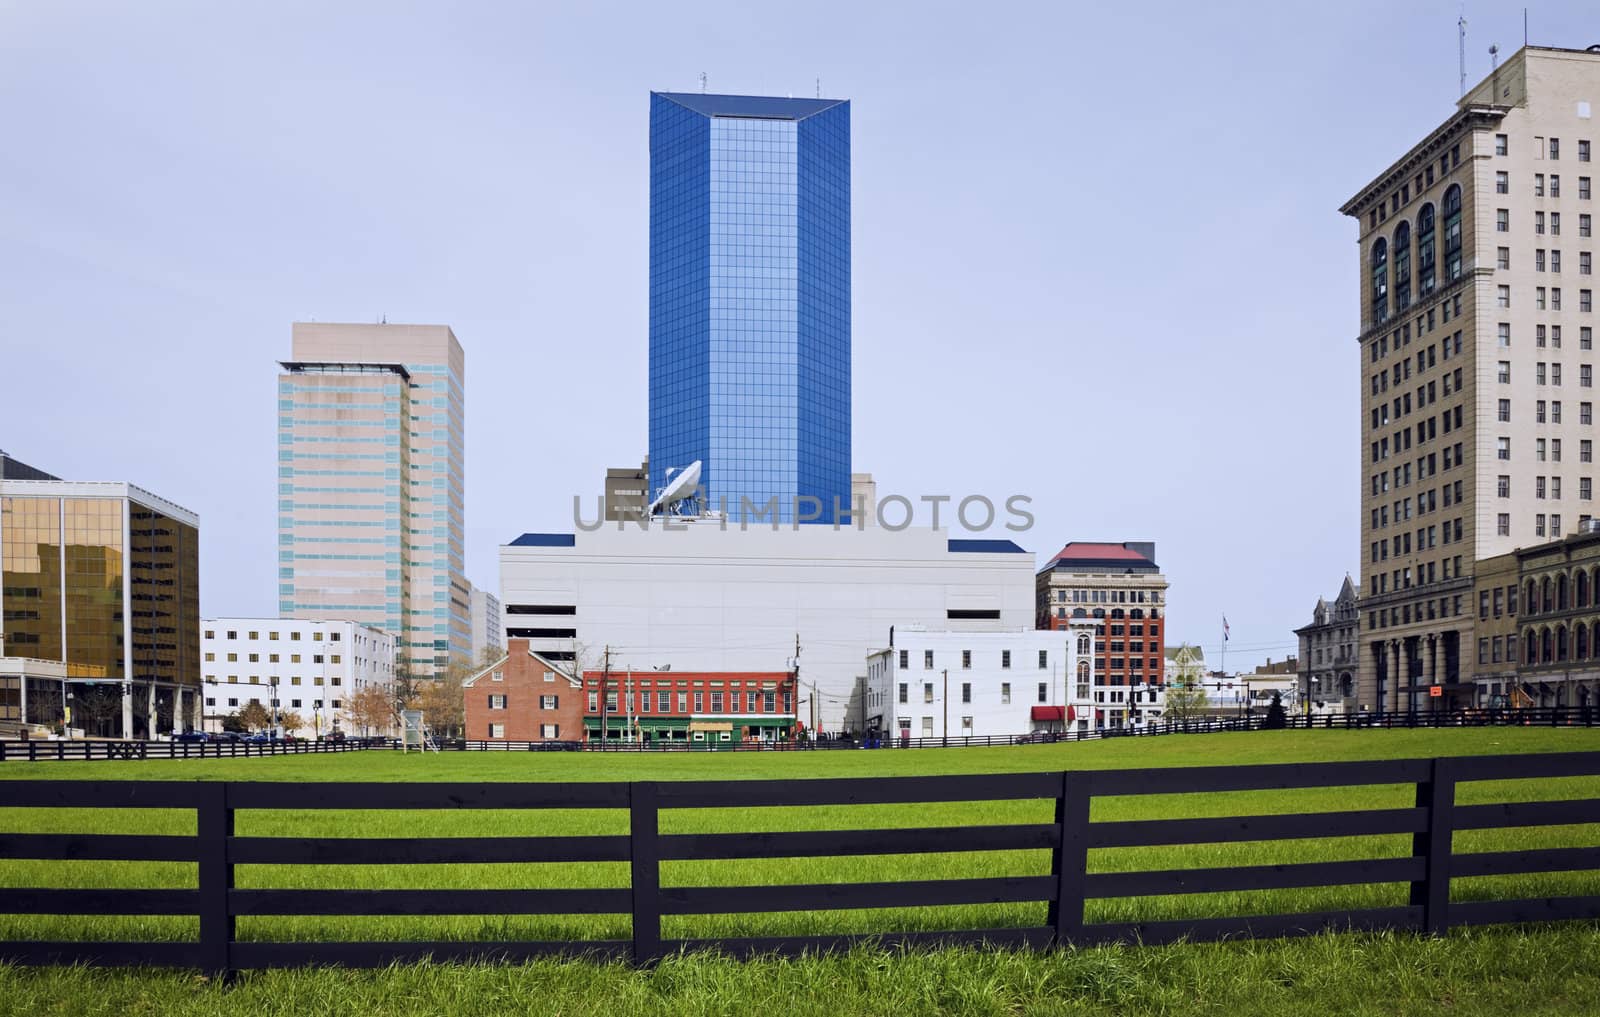 Lexington behind the fence by benkrut